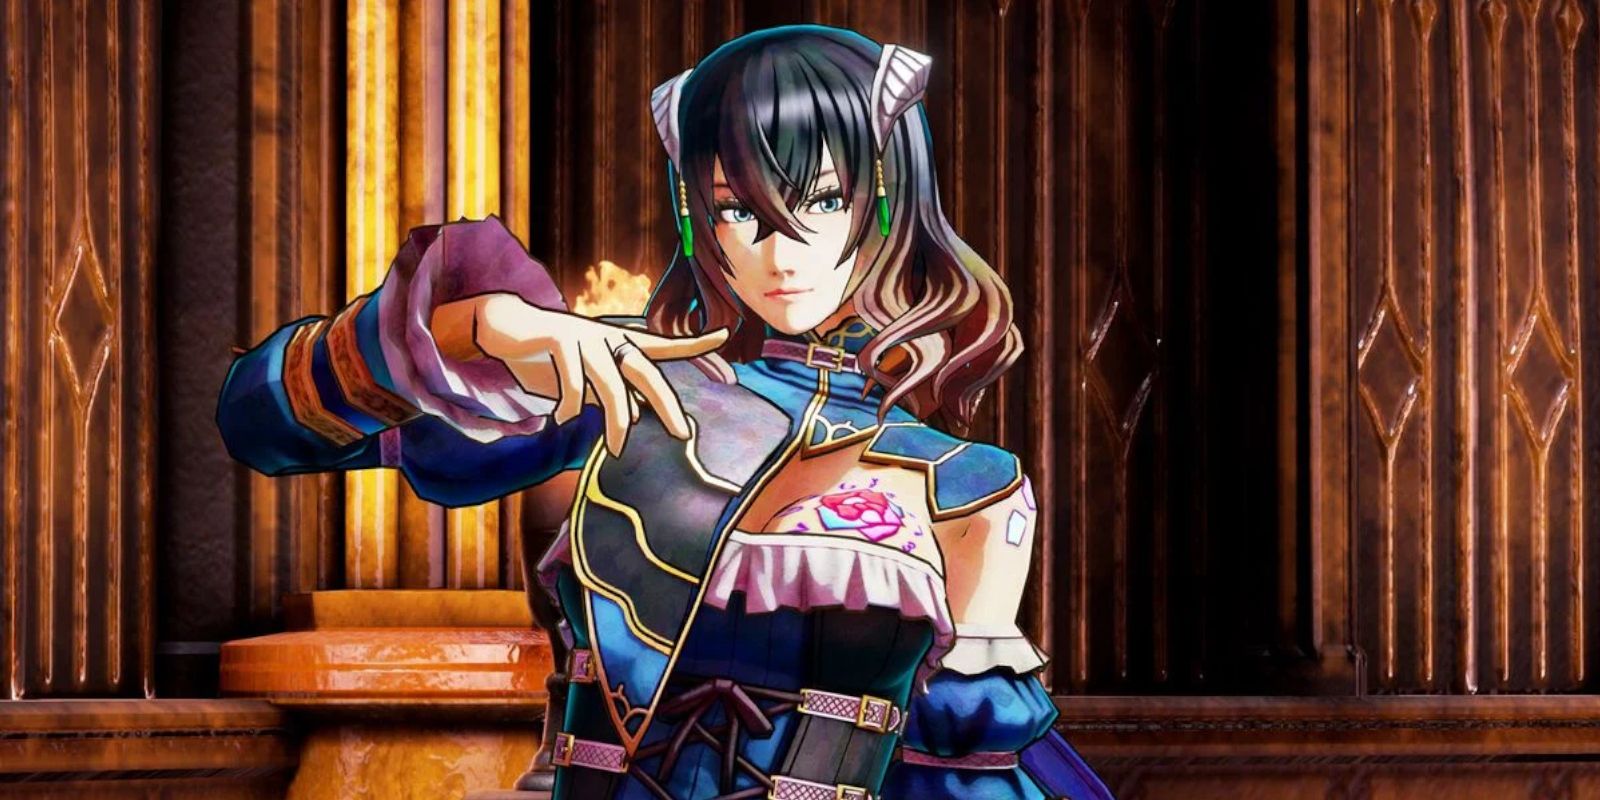 Miriam poses in a screenshot from Bloodstained: Ritual of the Night